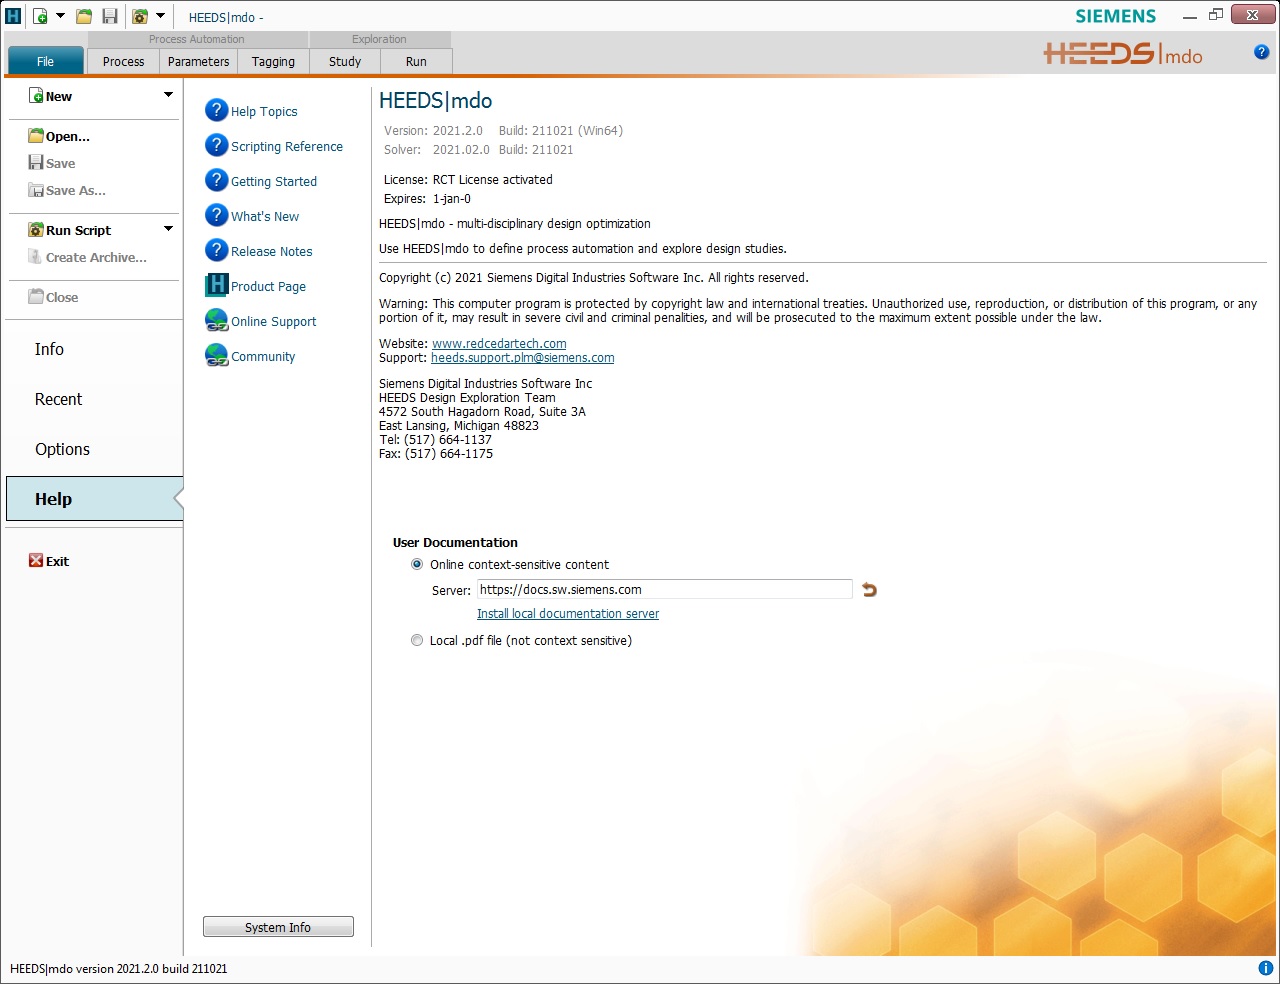 Working with Siemens HEEDS MDO 2021.2.0 + VCollab 21.1